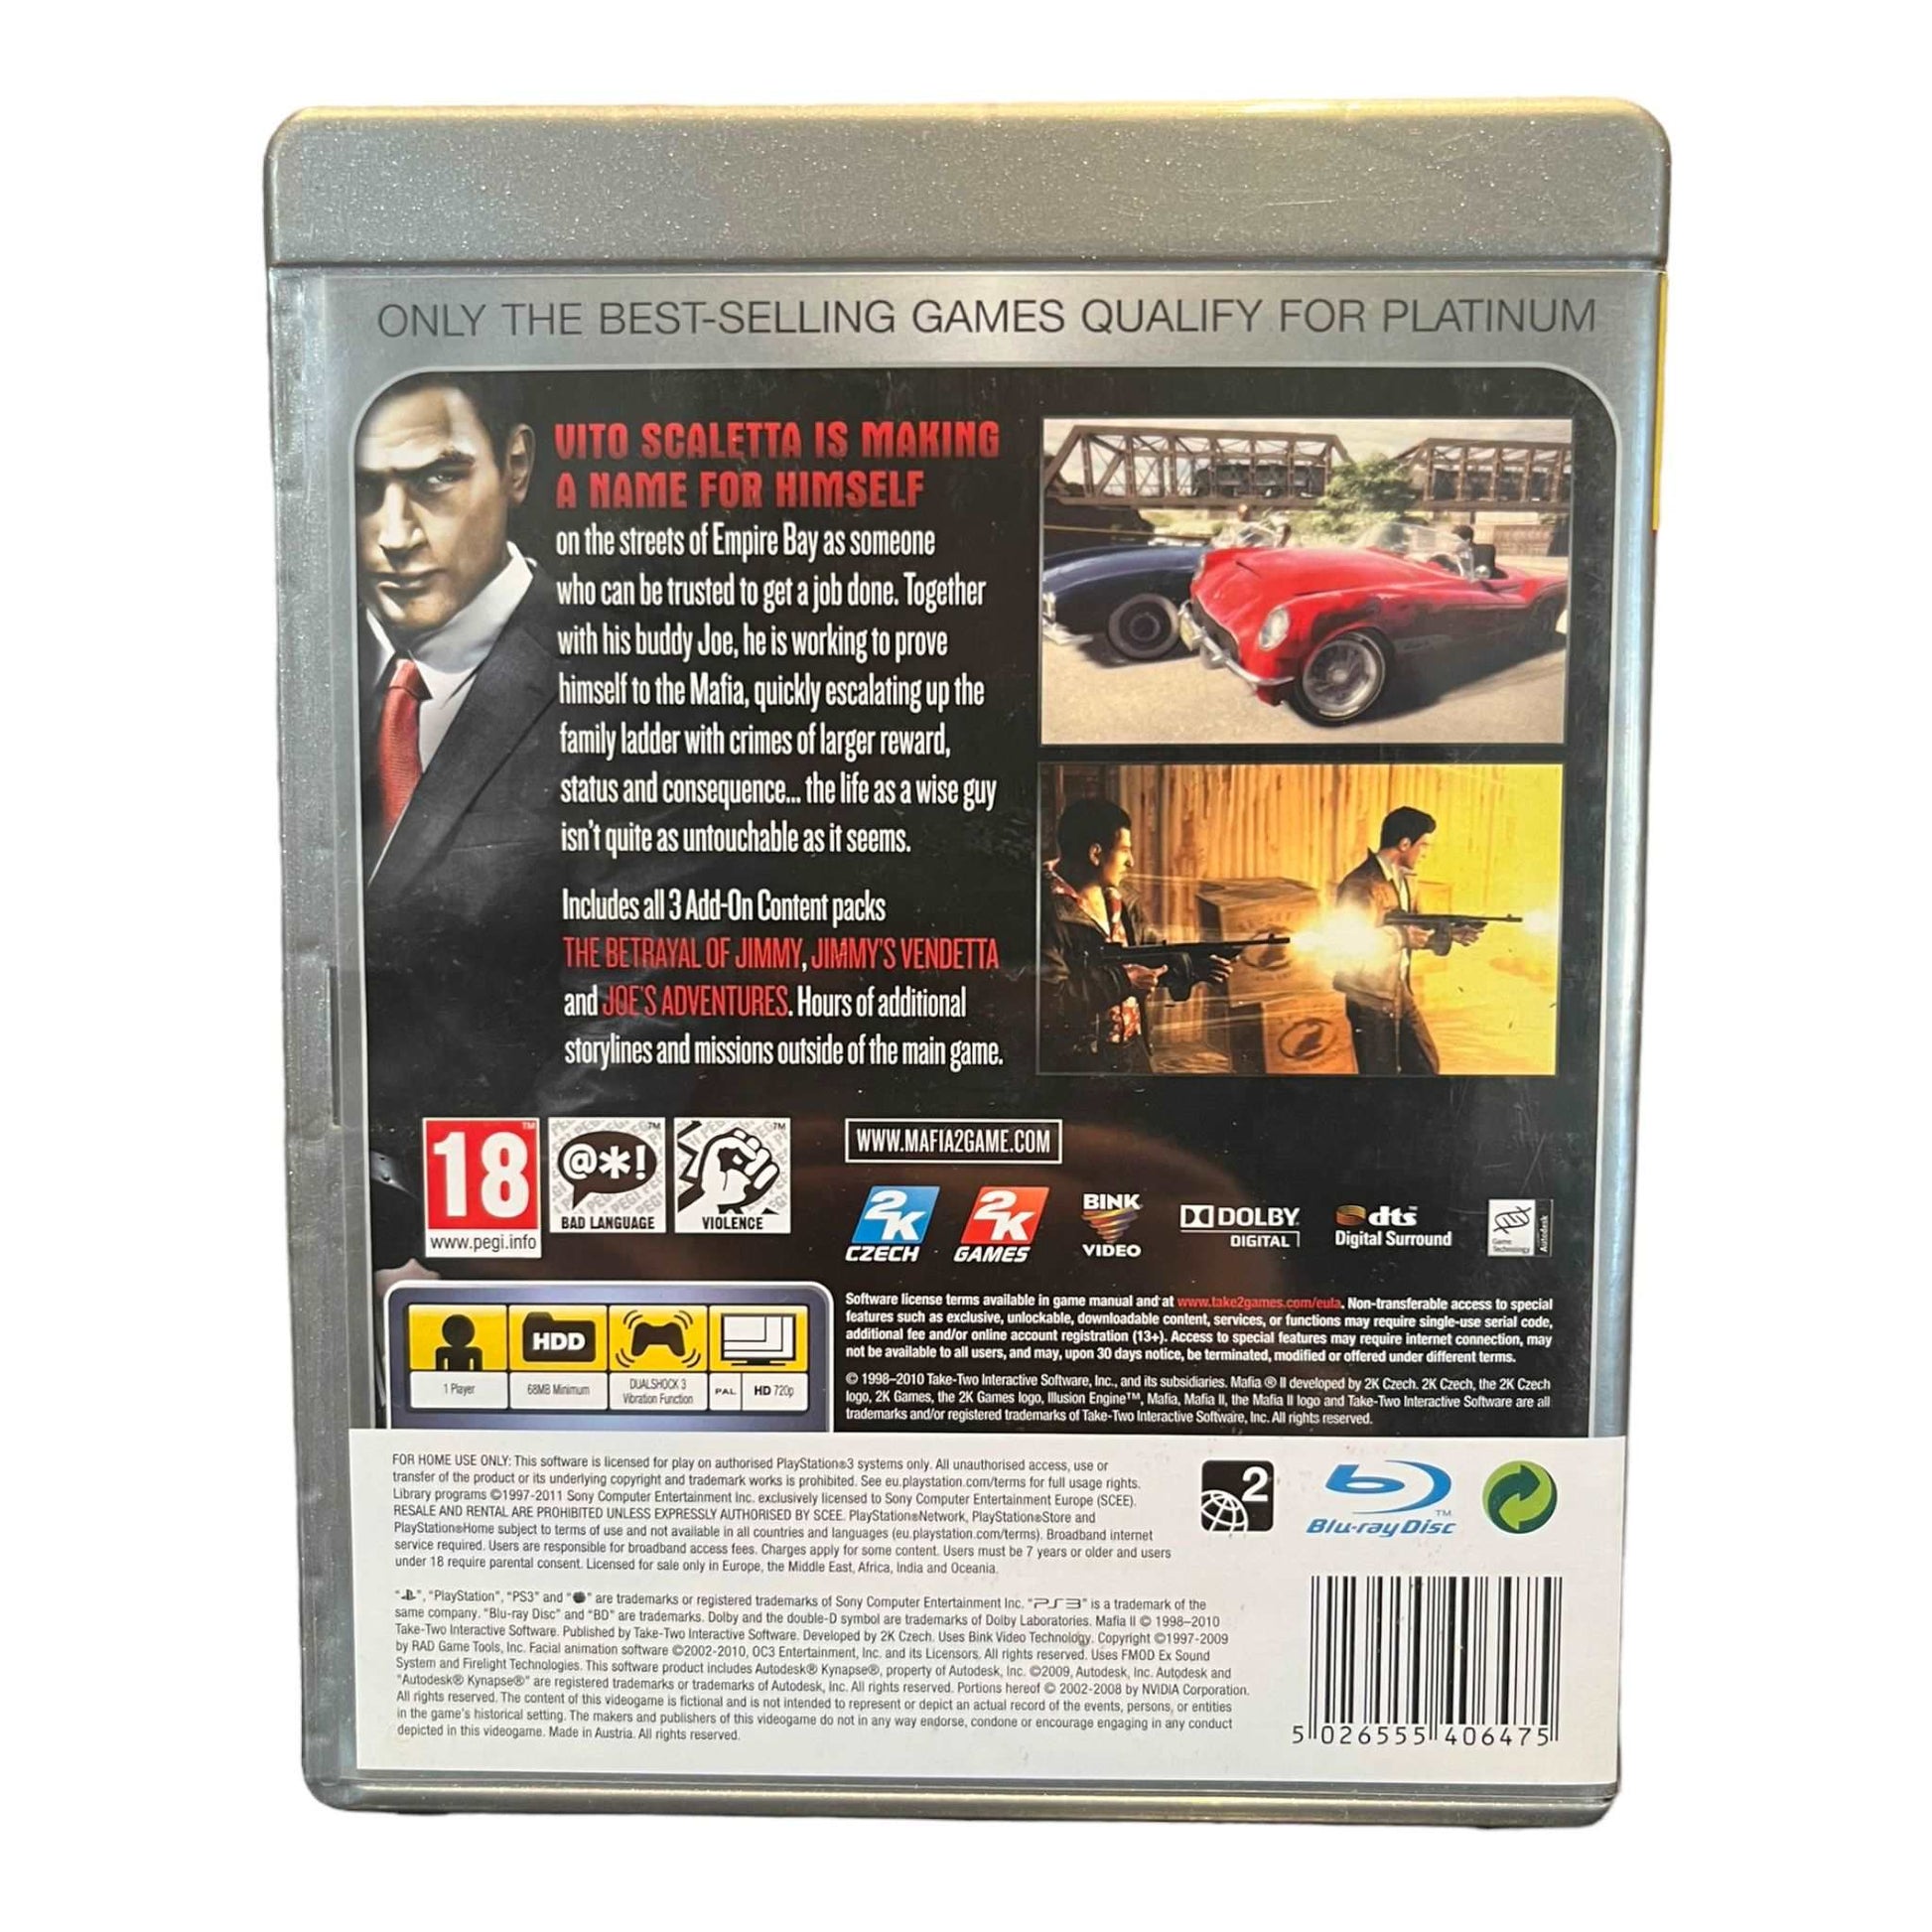 Mafia 2: Special Extended Edition - PS3 - Platinum